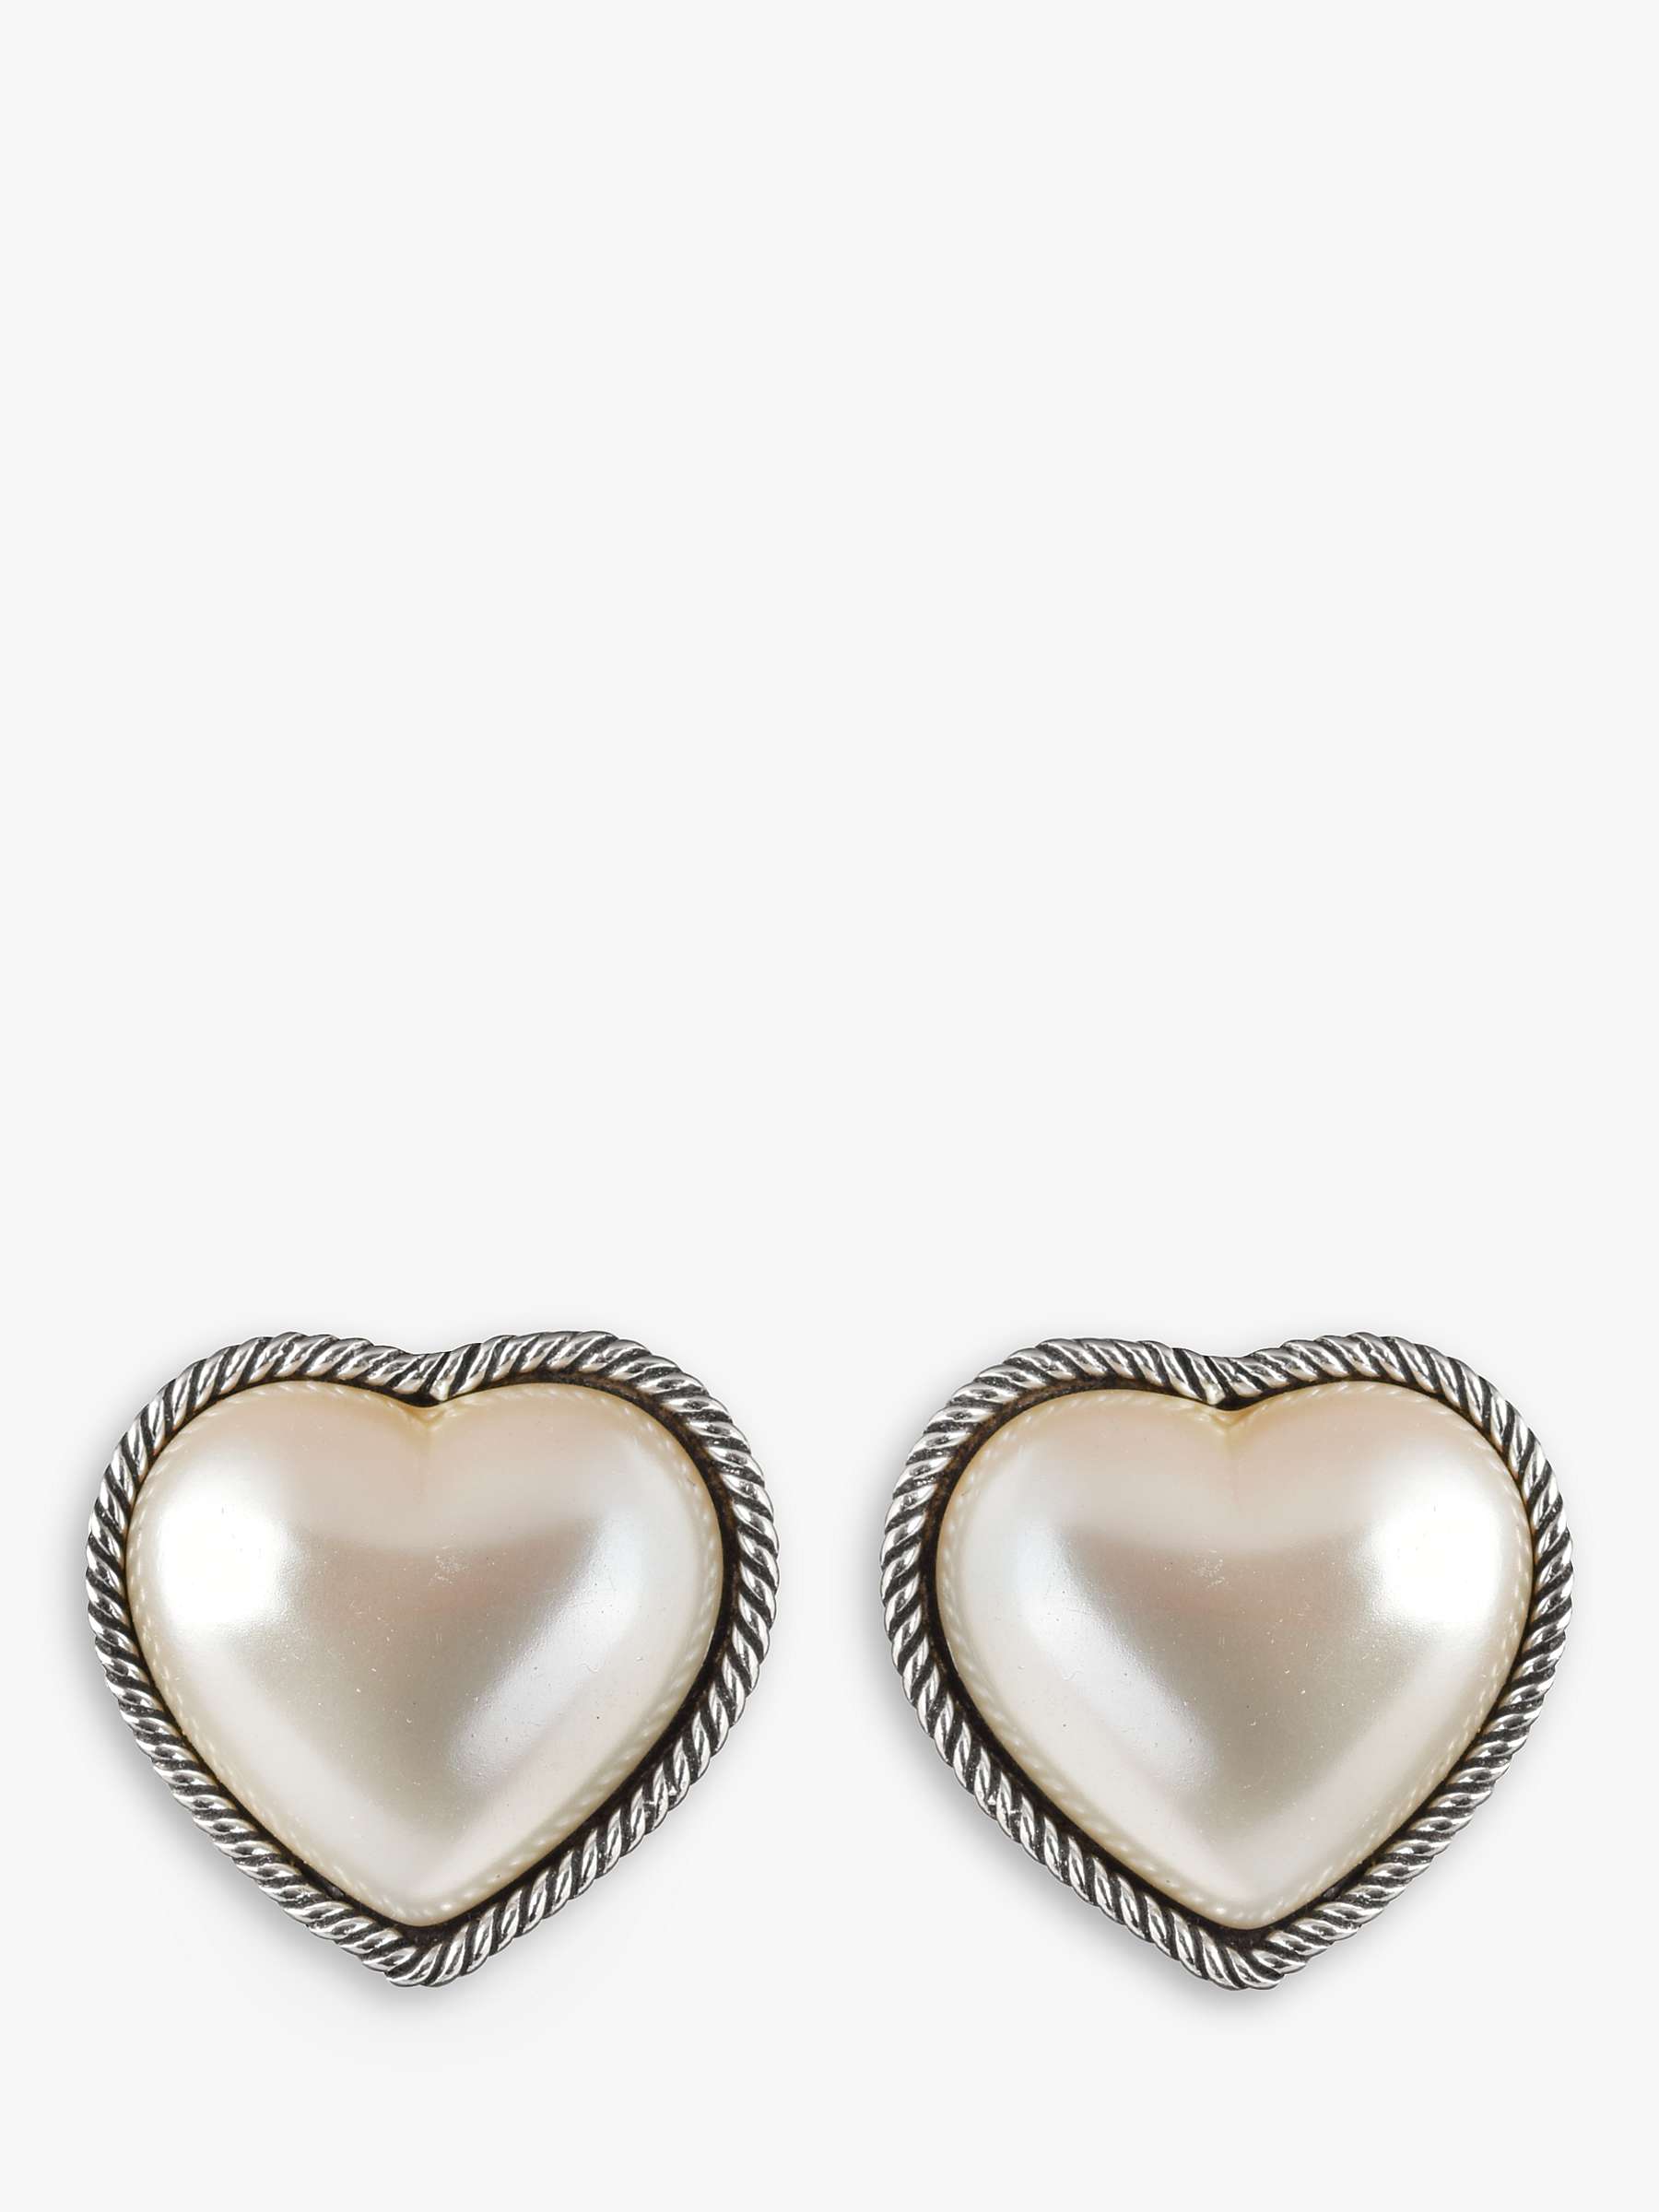 Buy Eclectica Vintage Faux Pearl Heart Clip-On Earrings, Dated Circa 1980s Online at johnlewis.com